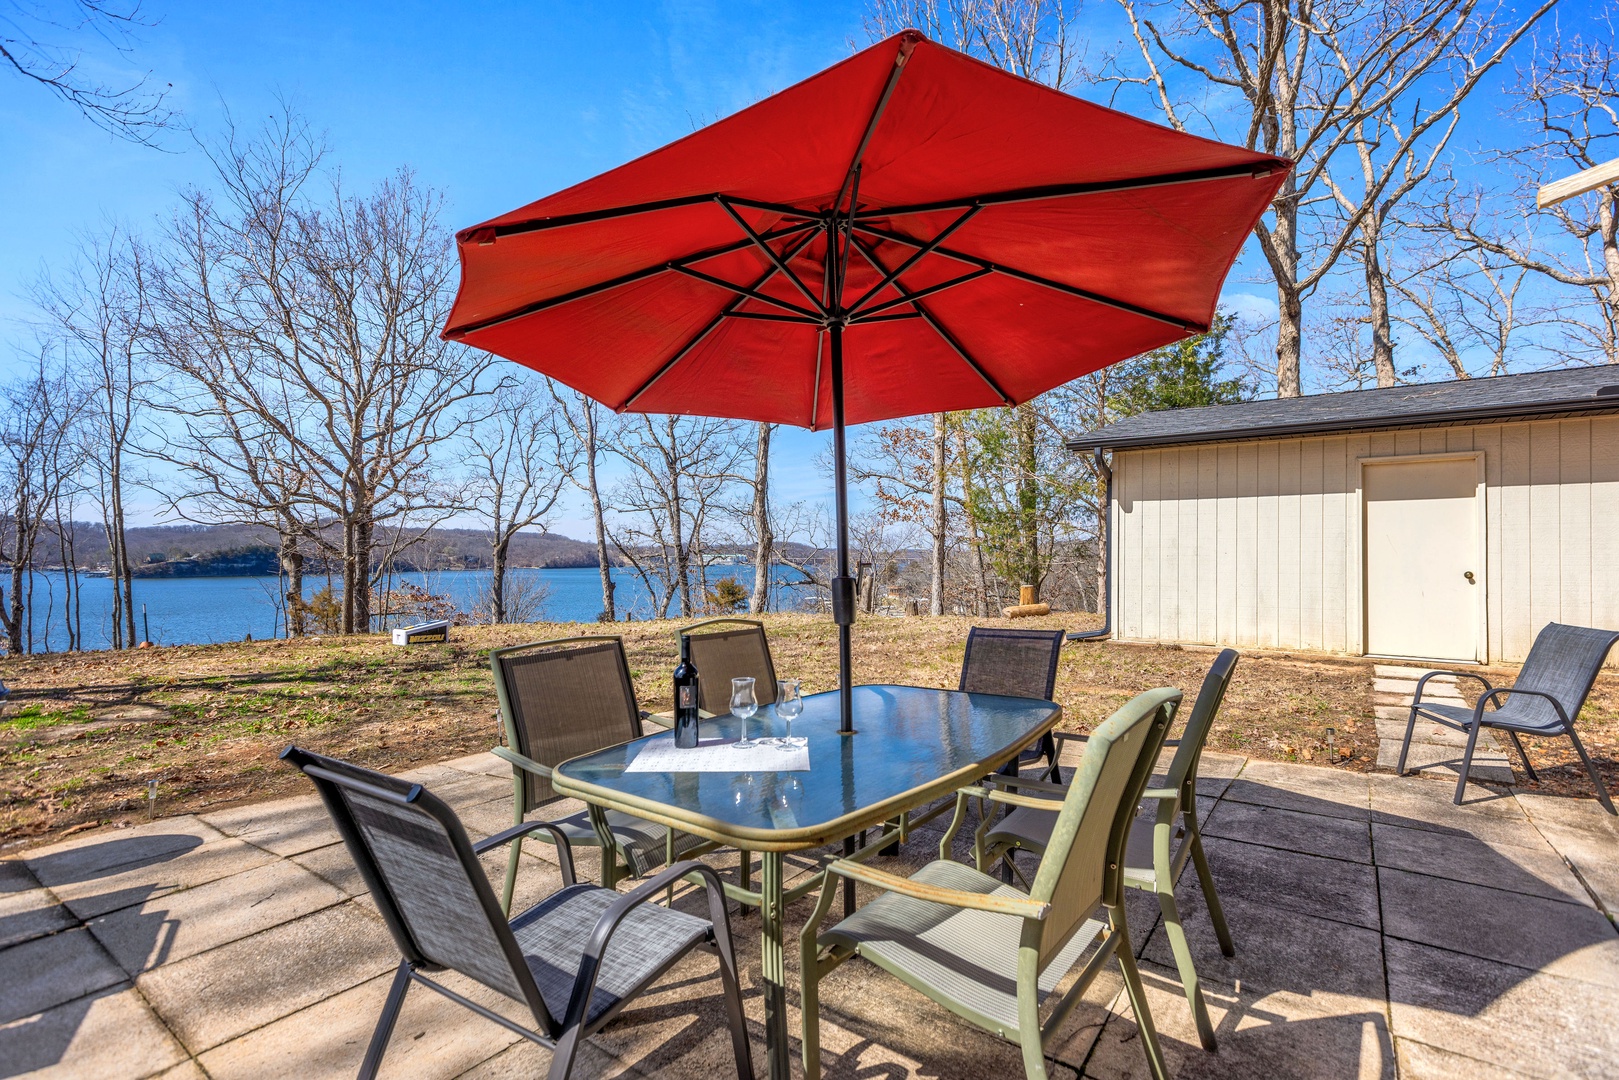 Enjoy the stunning lake view from the patio!